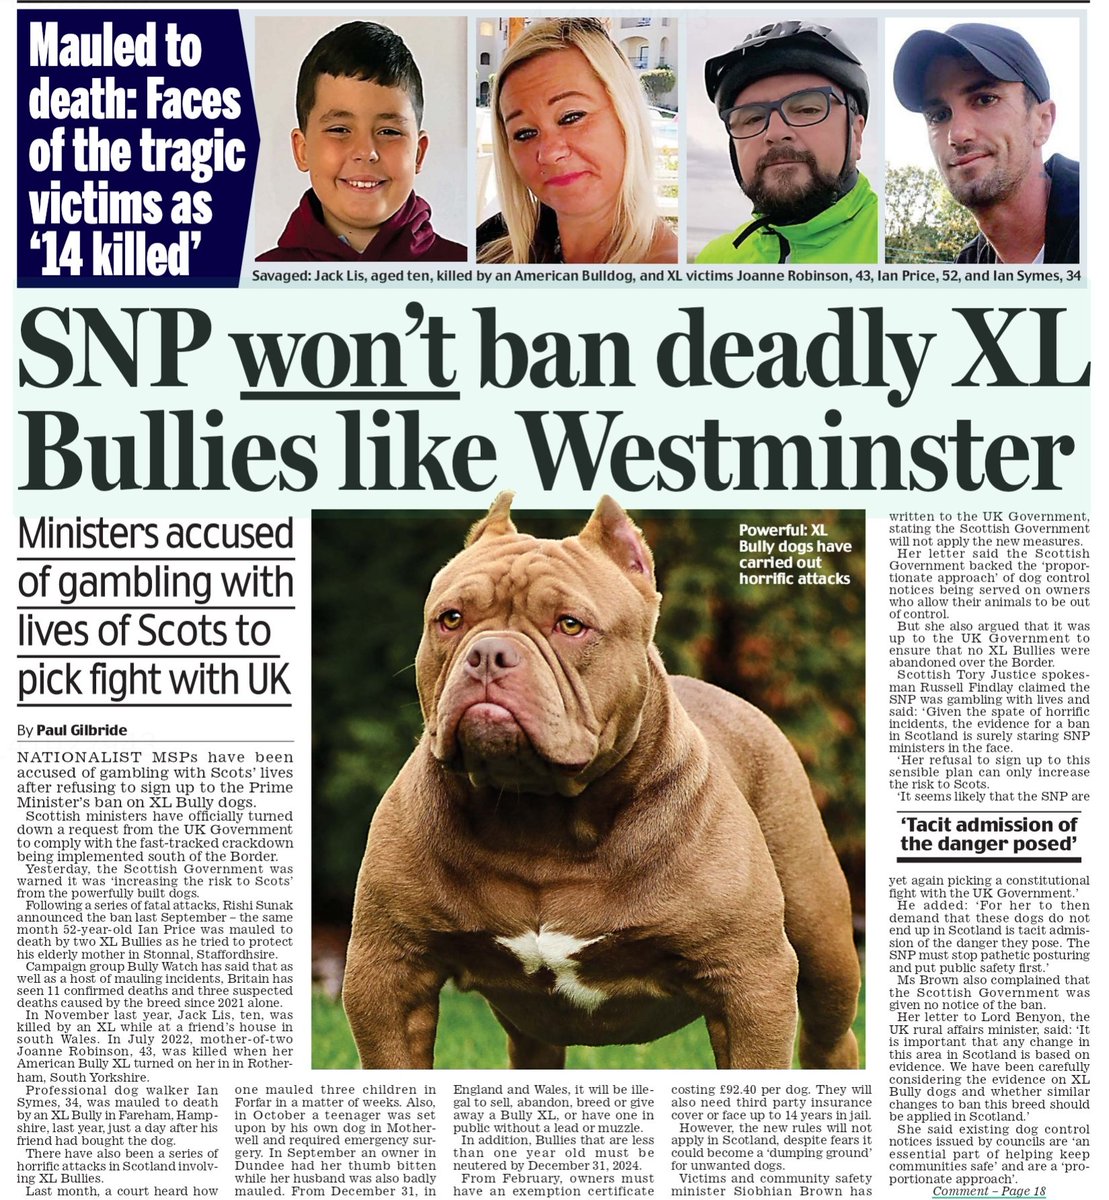 Britain has seen 11 confirmed deaths and three suspected deaths caused by XL bully dogs since 2021 alone. But the SNP won't ban them in Scotland, because they want to be different from England. What an absolute disgrace.